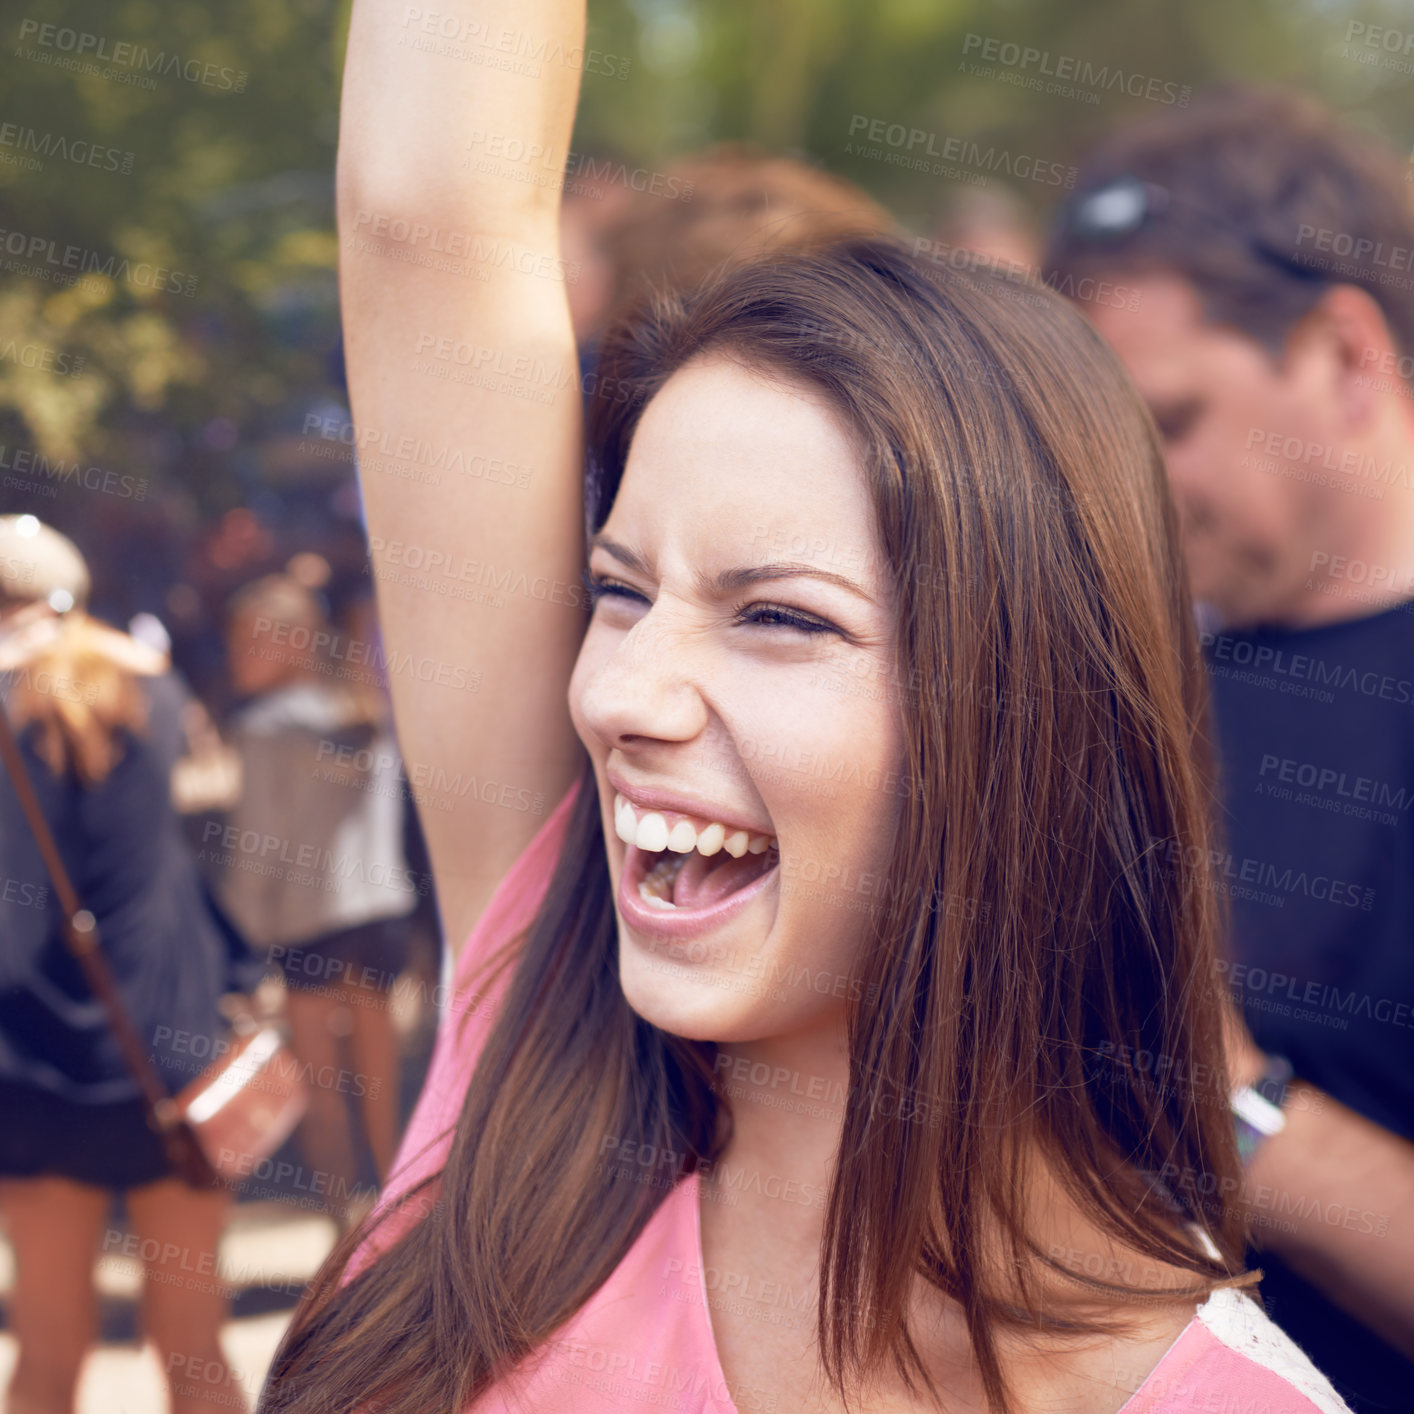 Buy stock photo A beautiful young woman smiling and enjoying music at a festival with arm raised in the air and crowd in the background